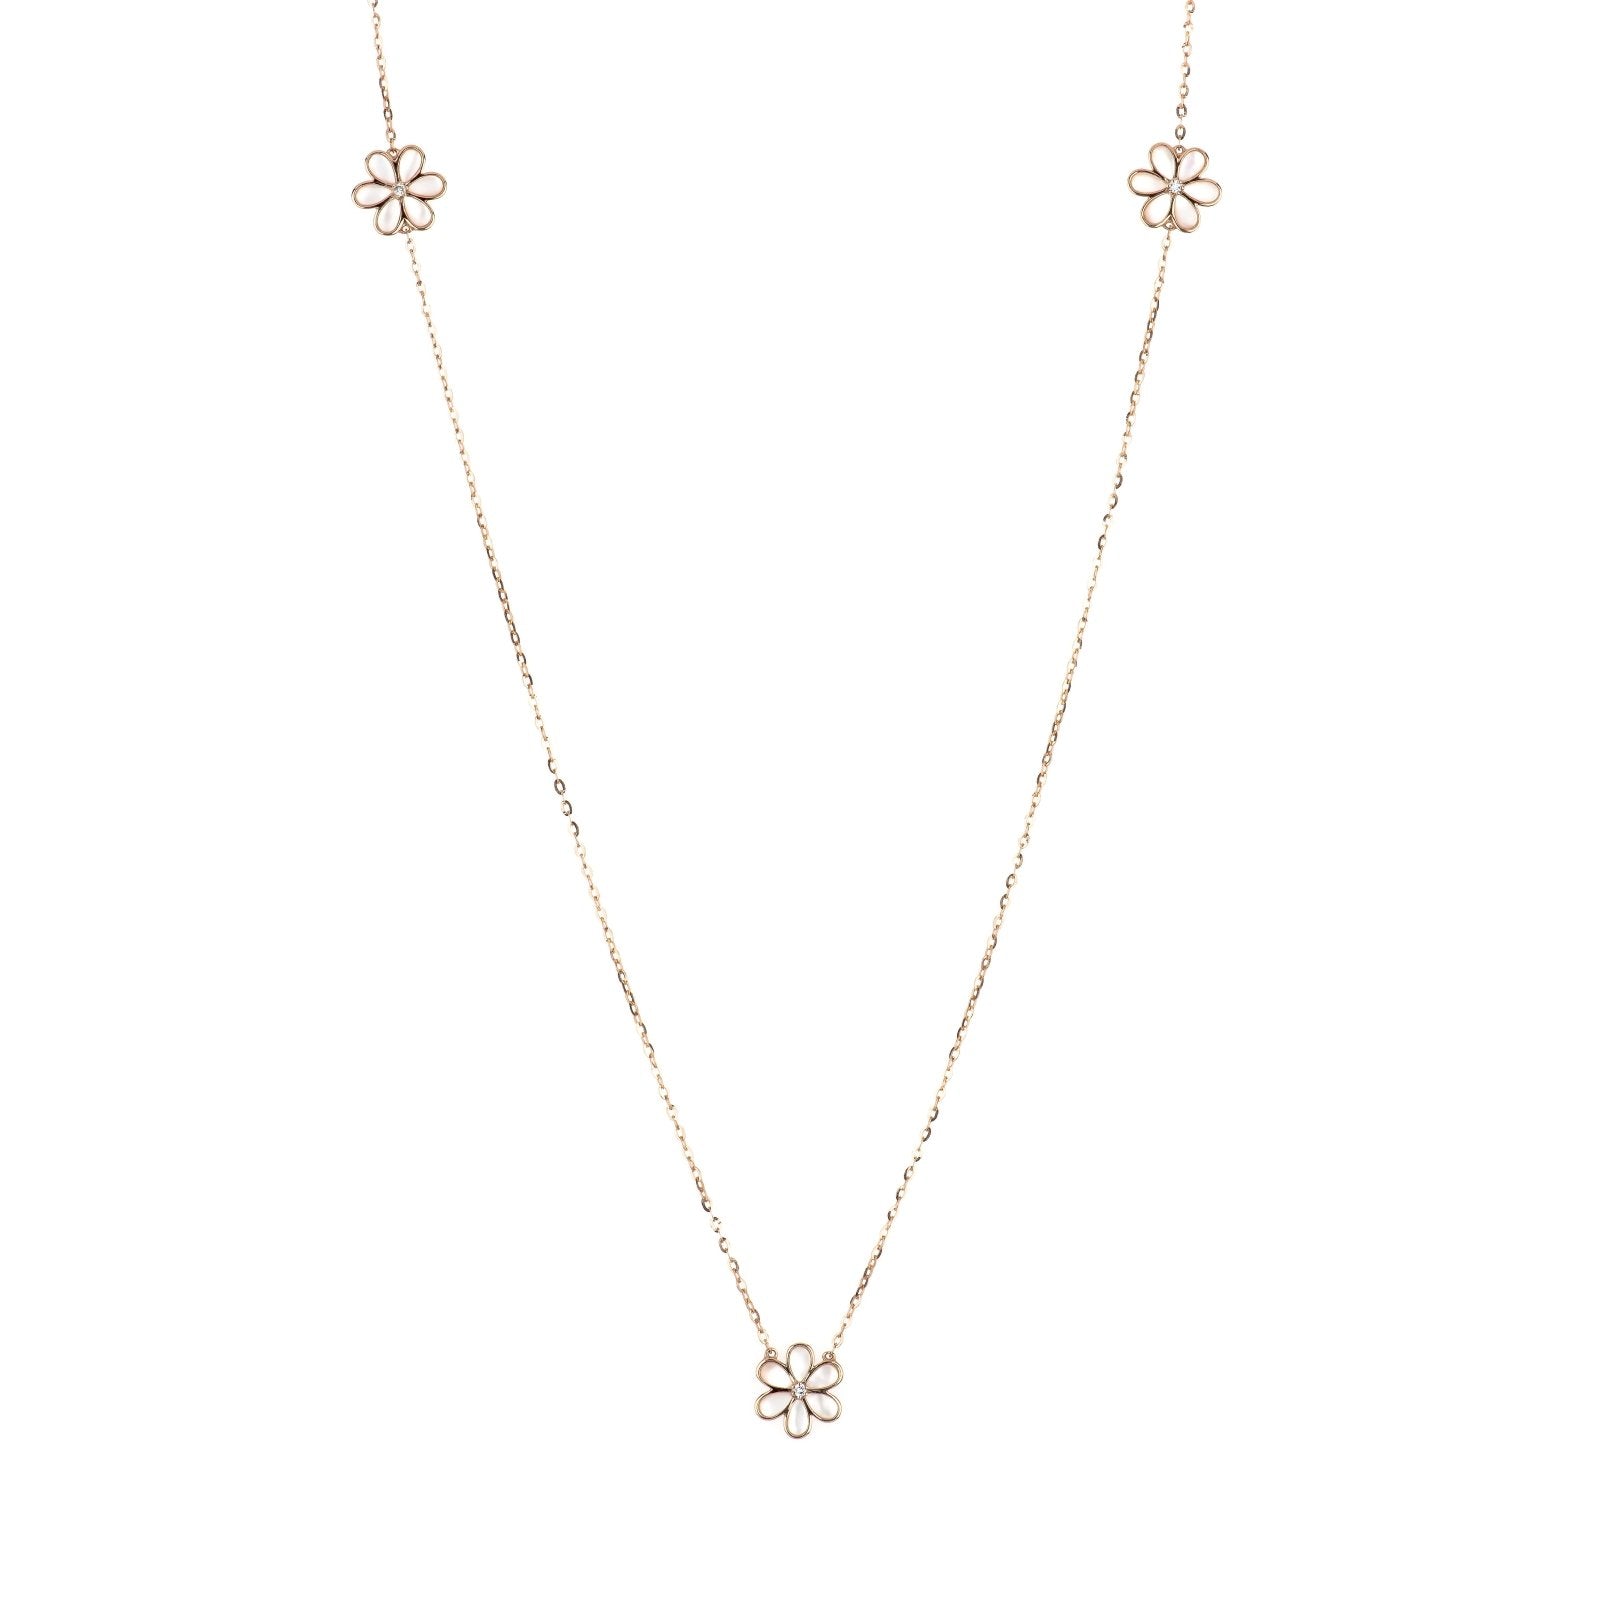 Mother of Pearl Flower with Diamonds Station Necklace Necklaces Estella Collection #product_description# 17229 14k Birthstone Diamond #tag4# #tag5# #tag6# #tag7# #tag8# #tag9# #tag10#